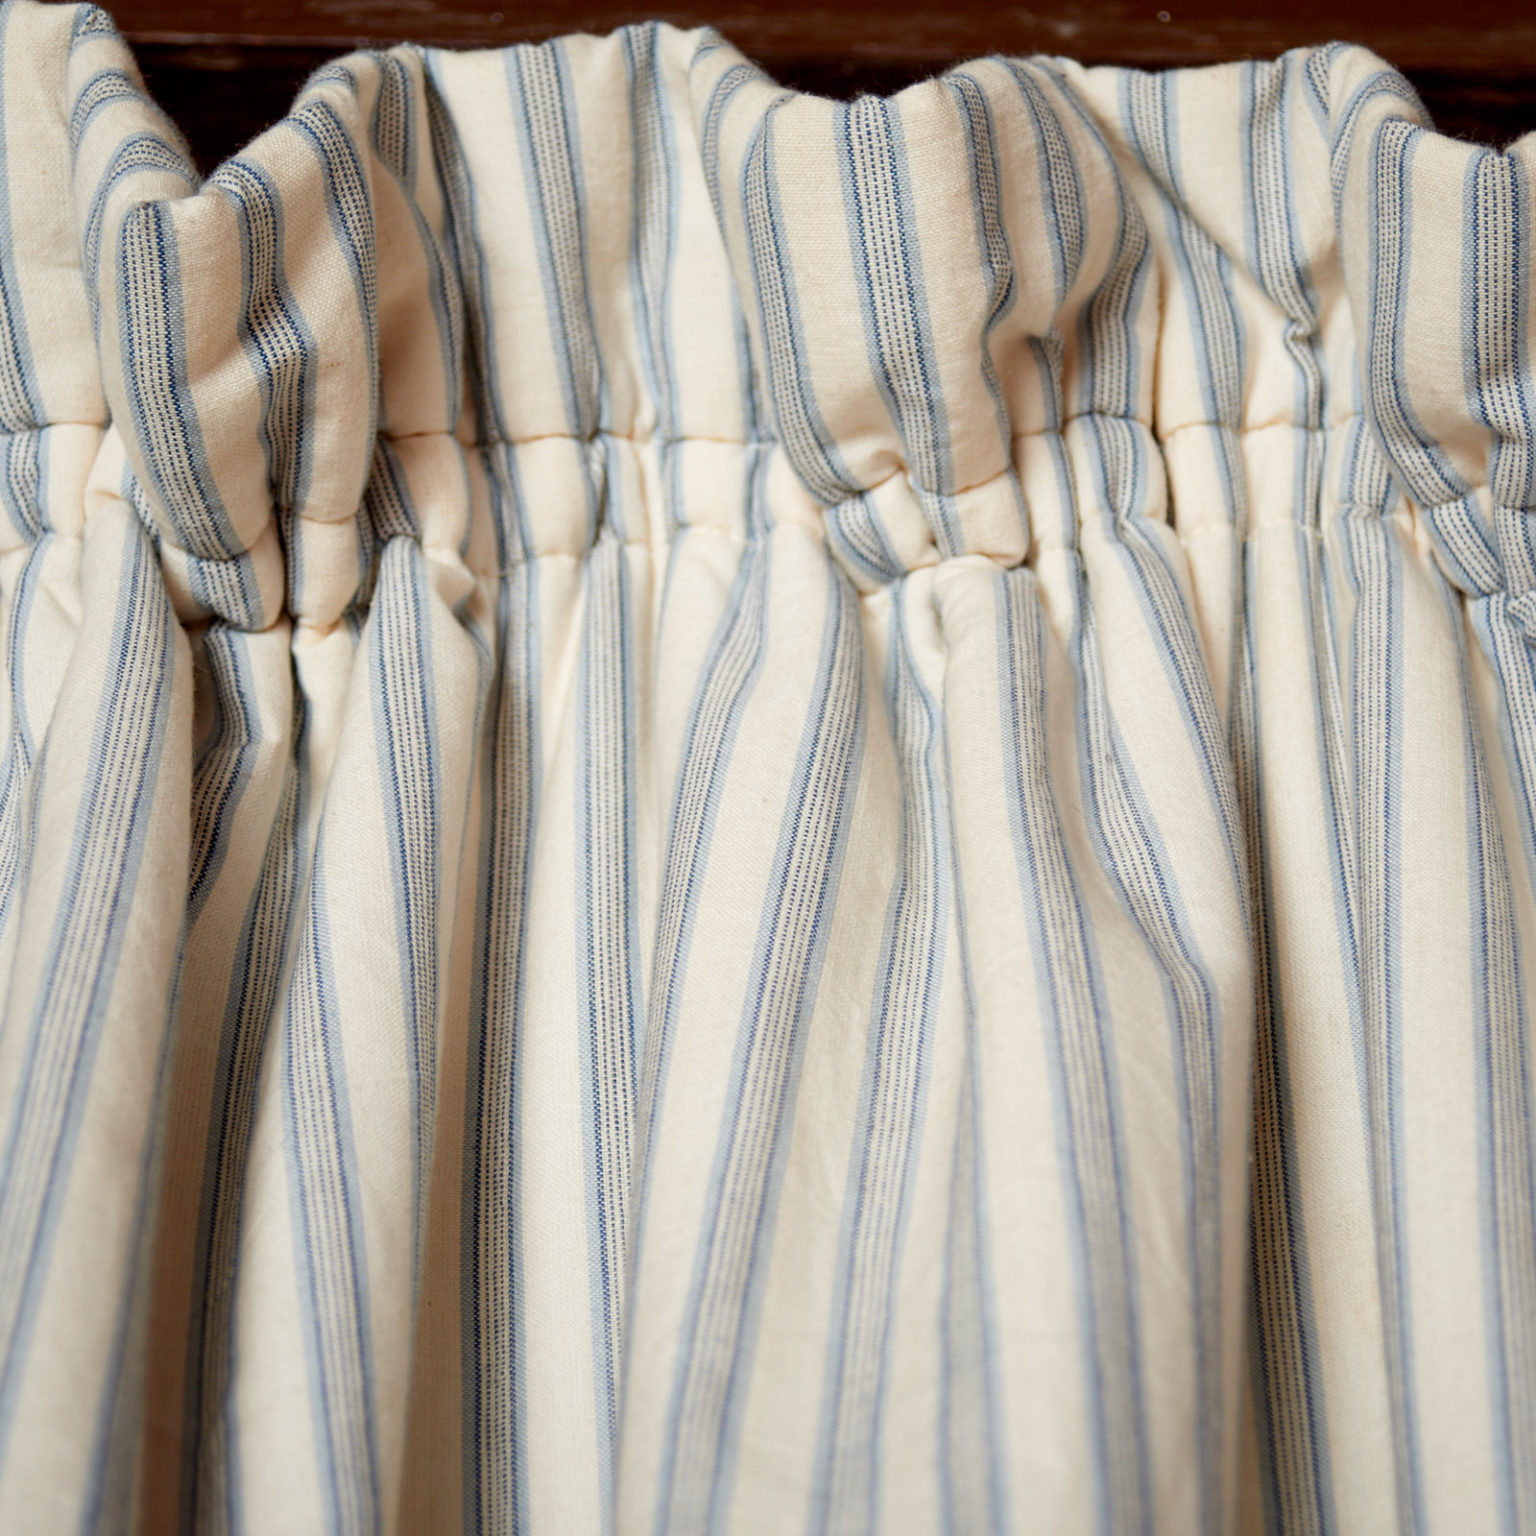 A pair of blue and white 'Ticking' curtains - LASSCO - England's prime ...